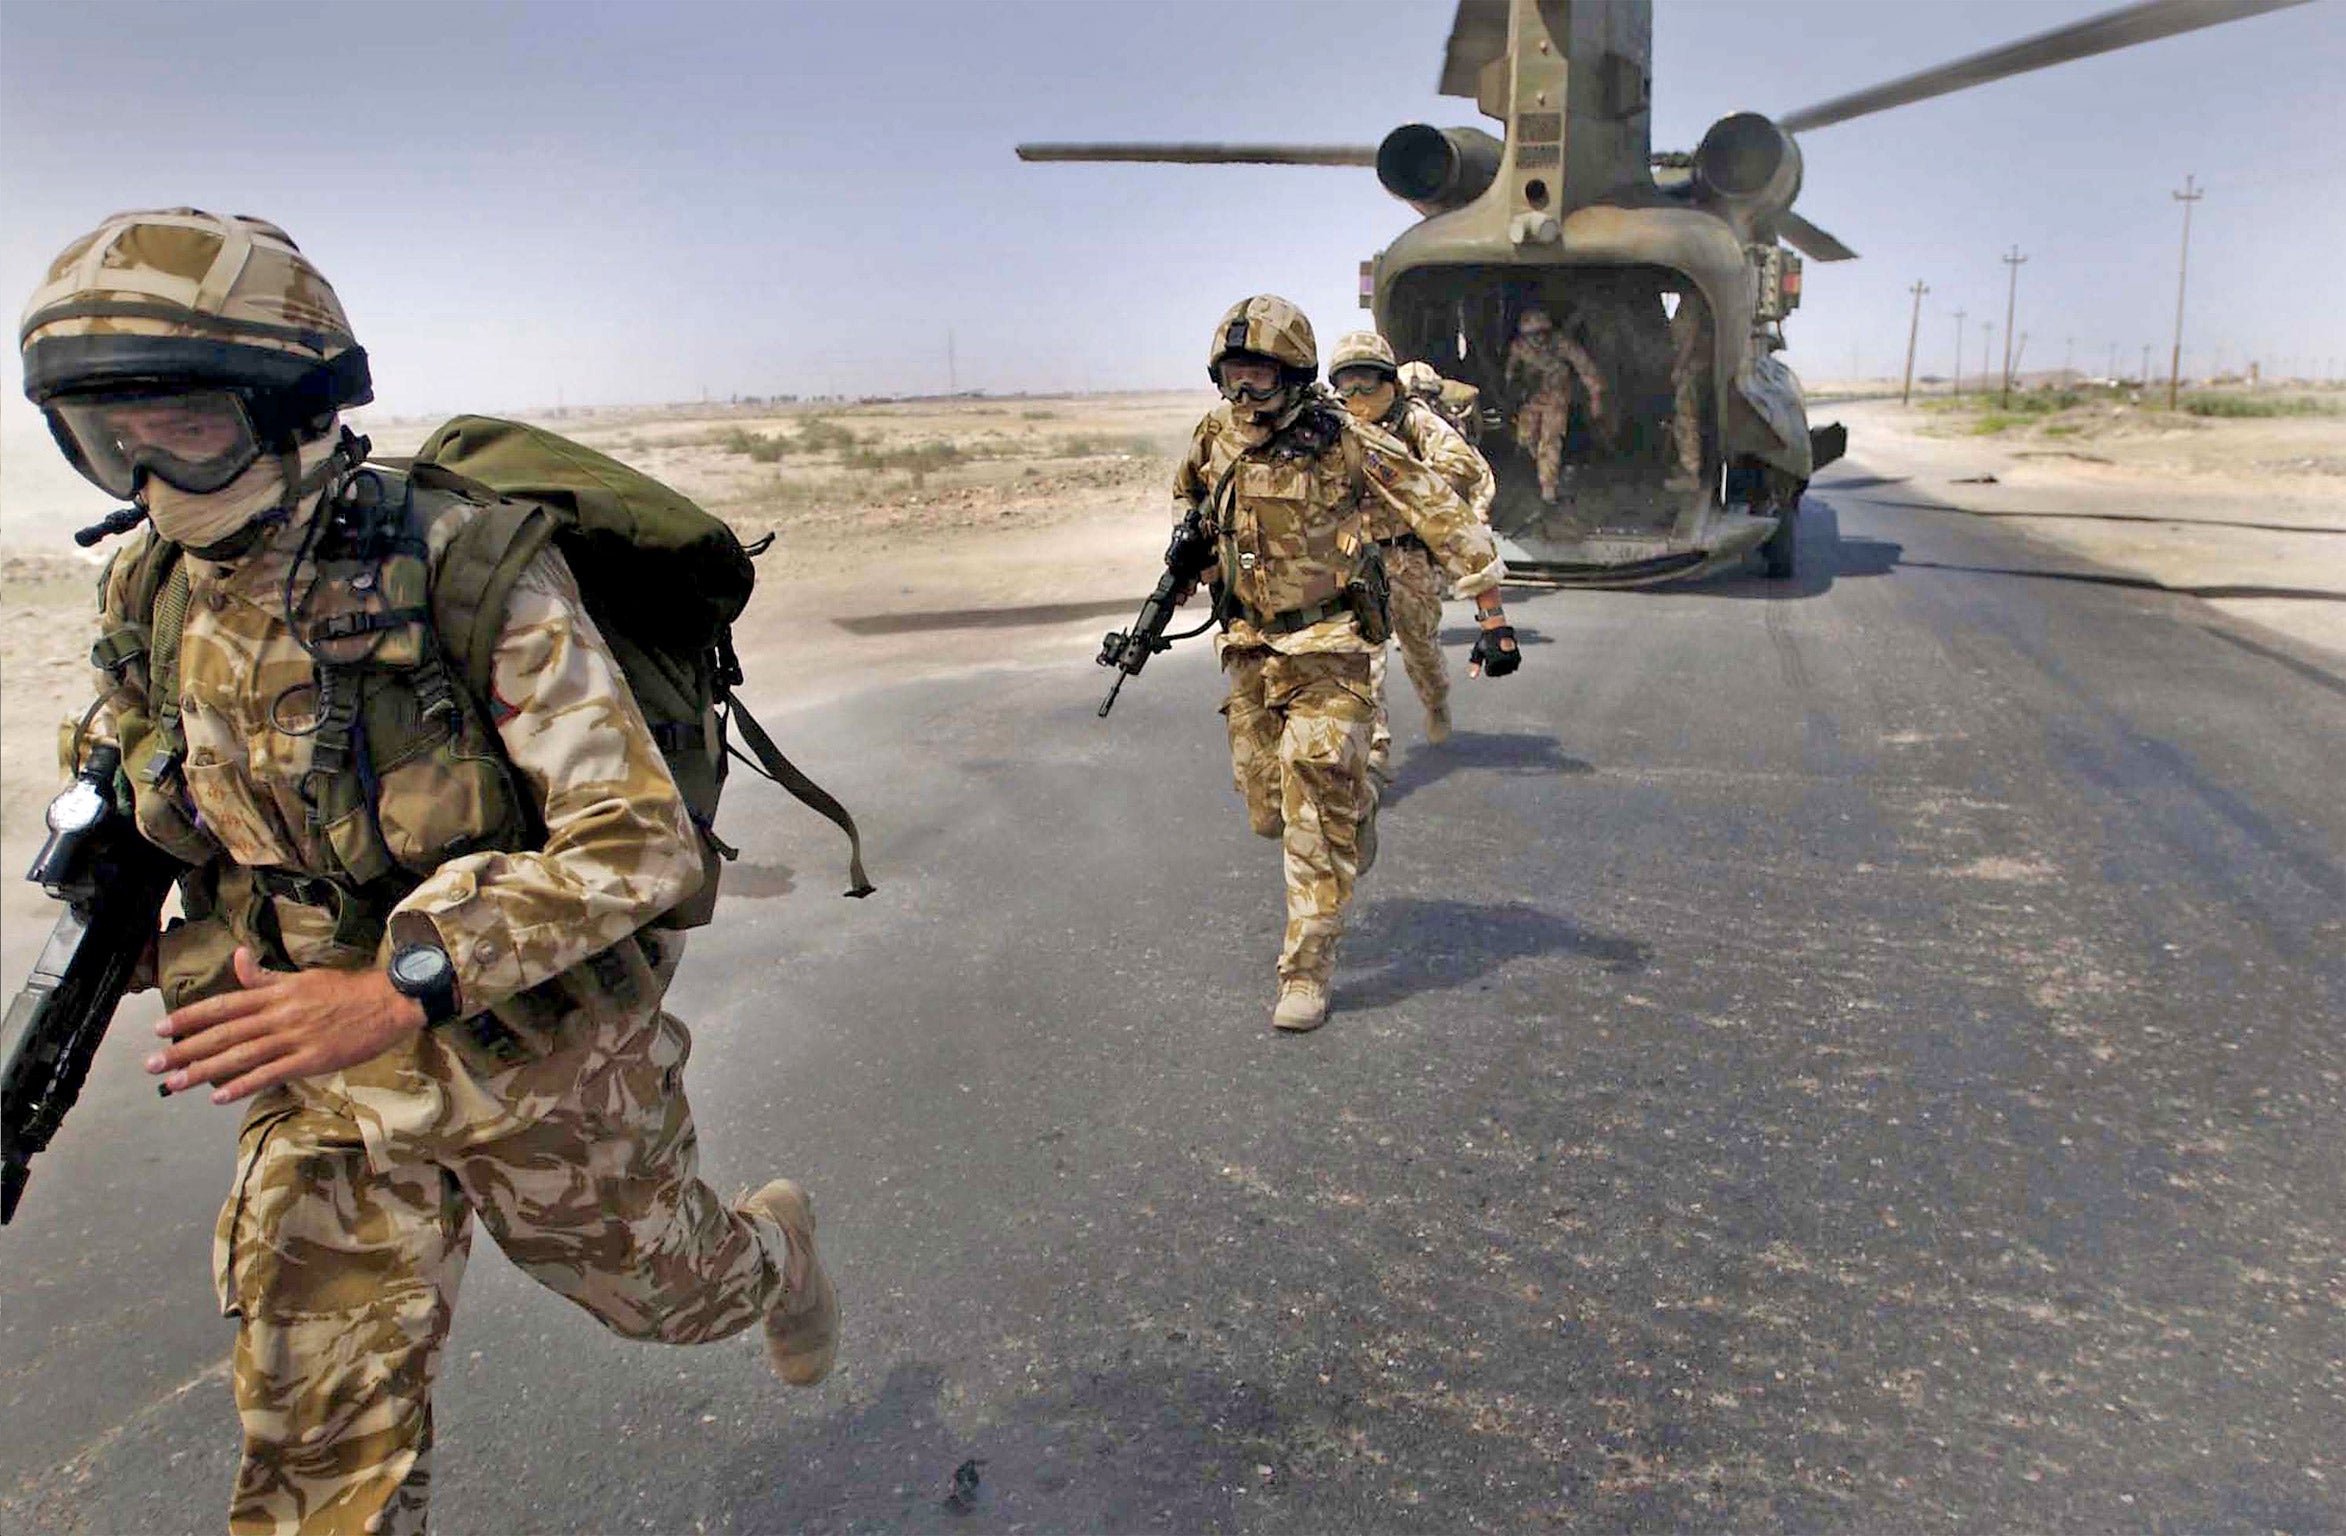 The Royal Welsh Fusiliers near Basra, southern Iraq, in 2004. 179 UK servicemen and women died in the Iraq war